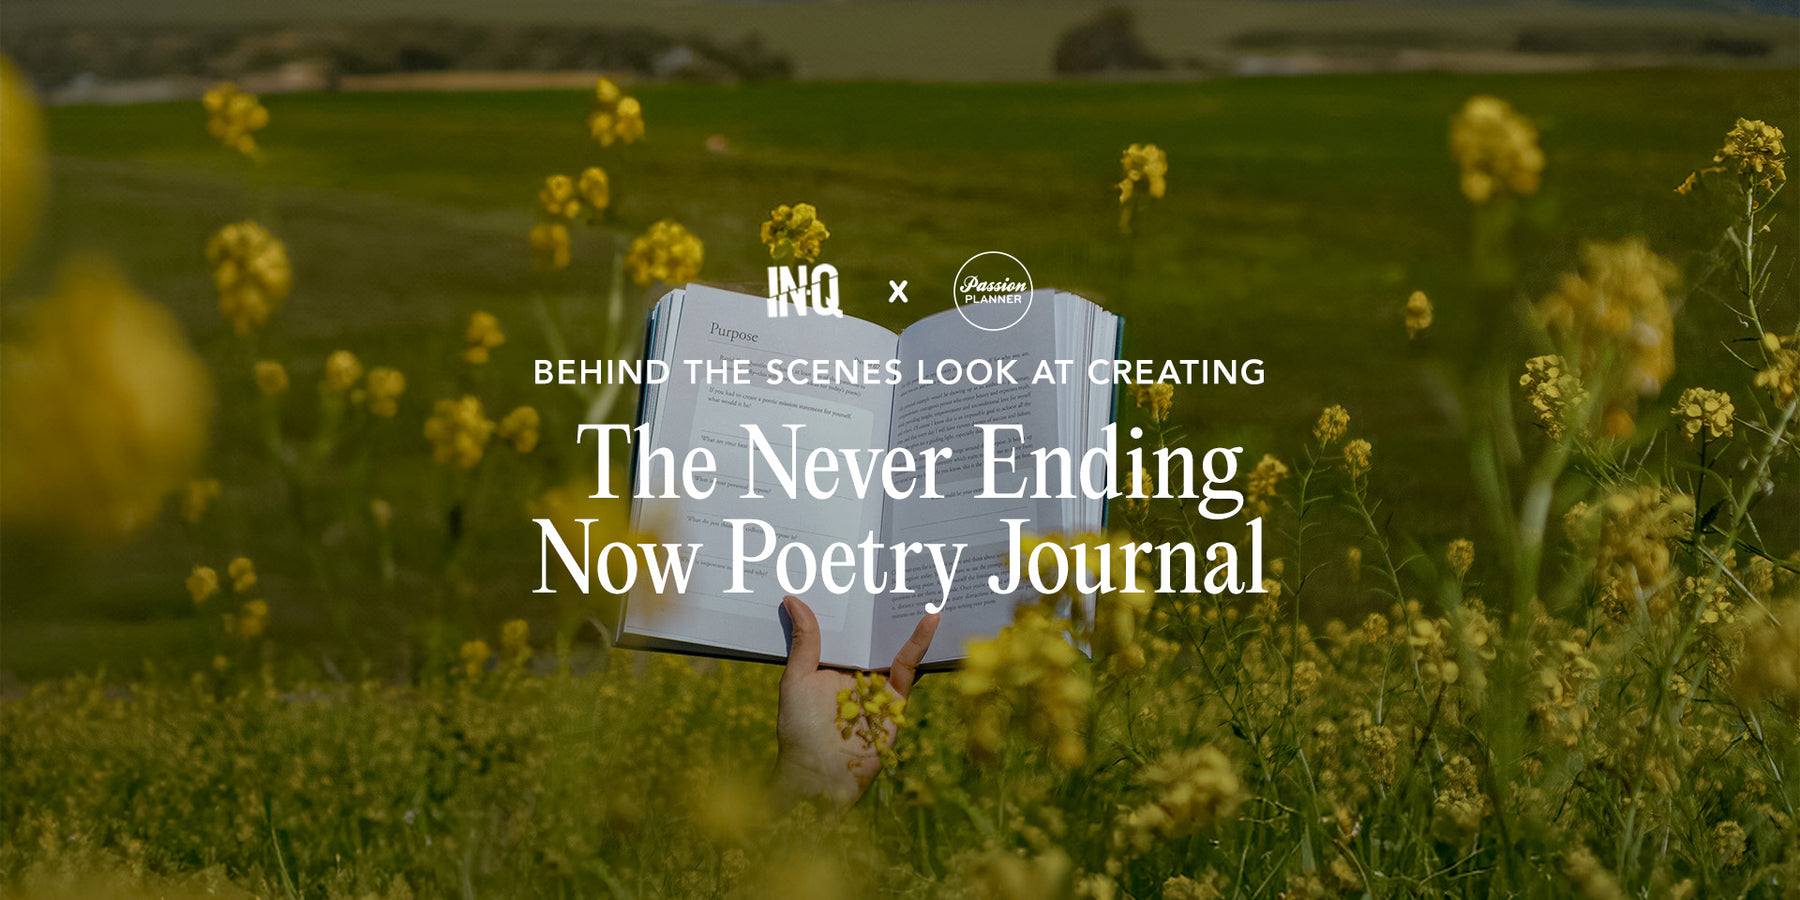 Behind the scenes look at creating The Never Ending Now Poetry Journal